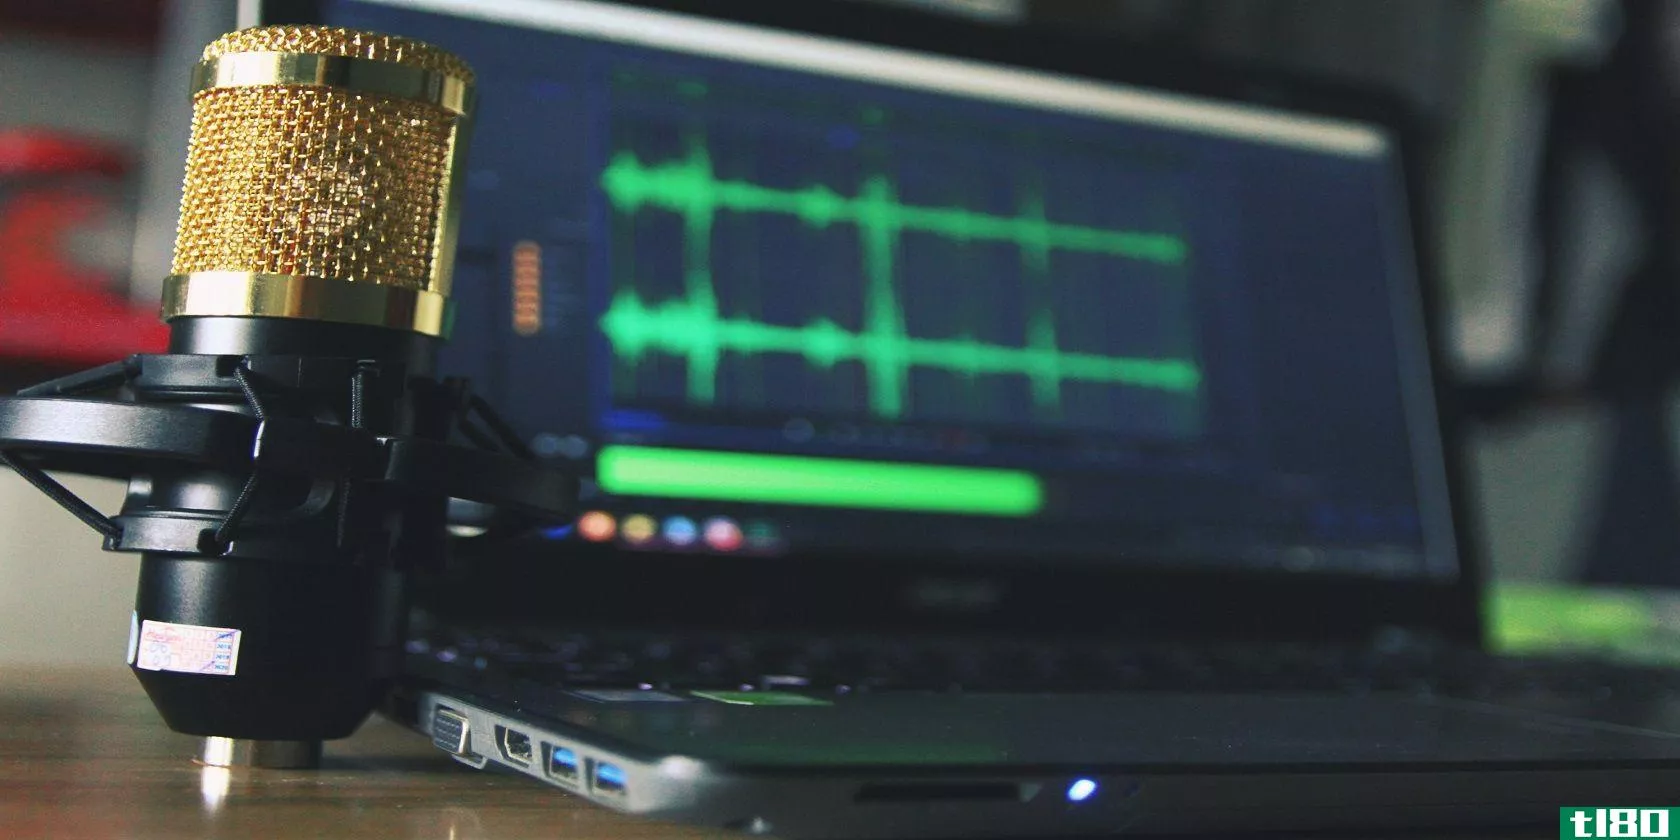 Image of microphone and audio editing software on a laptop screen